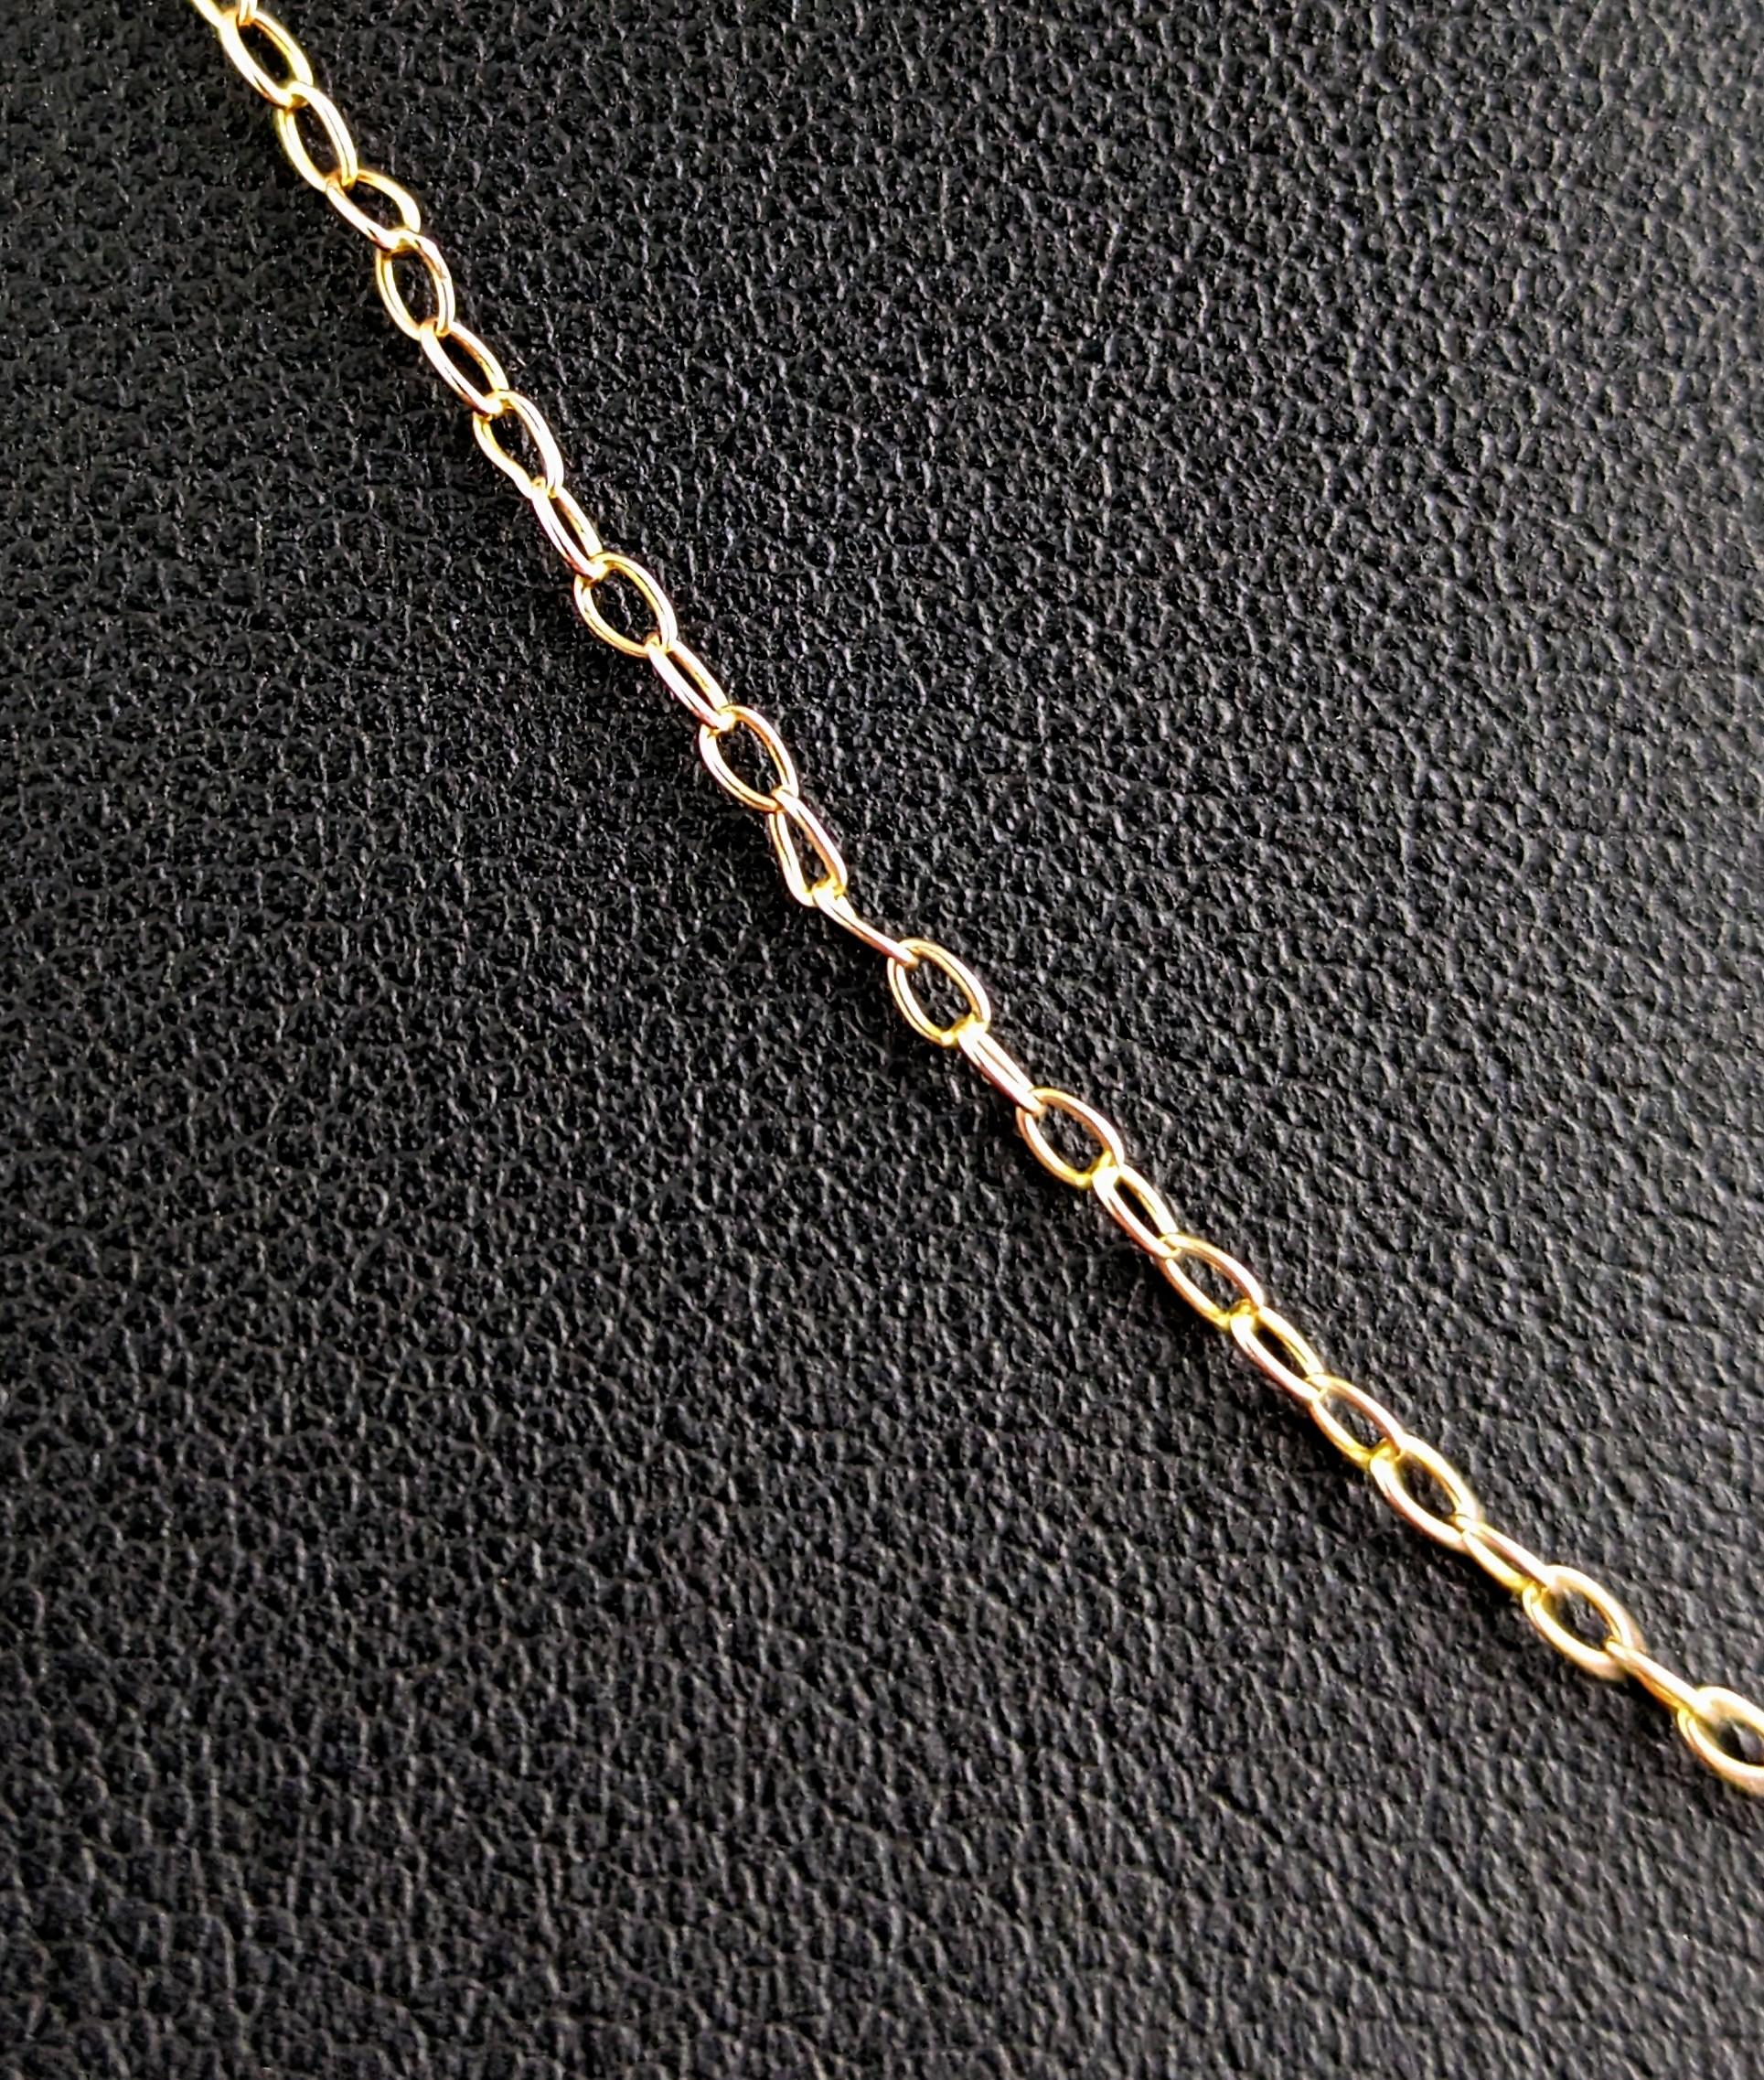 Antique 9k Gold Dainty Trace Link Chain Necklace, Edwardian 1